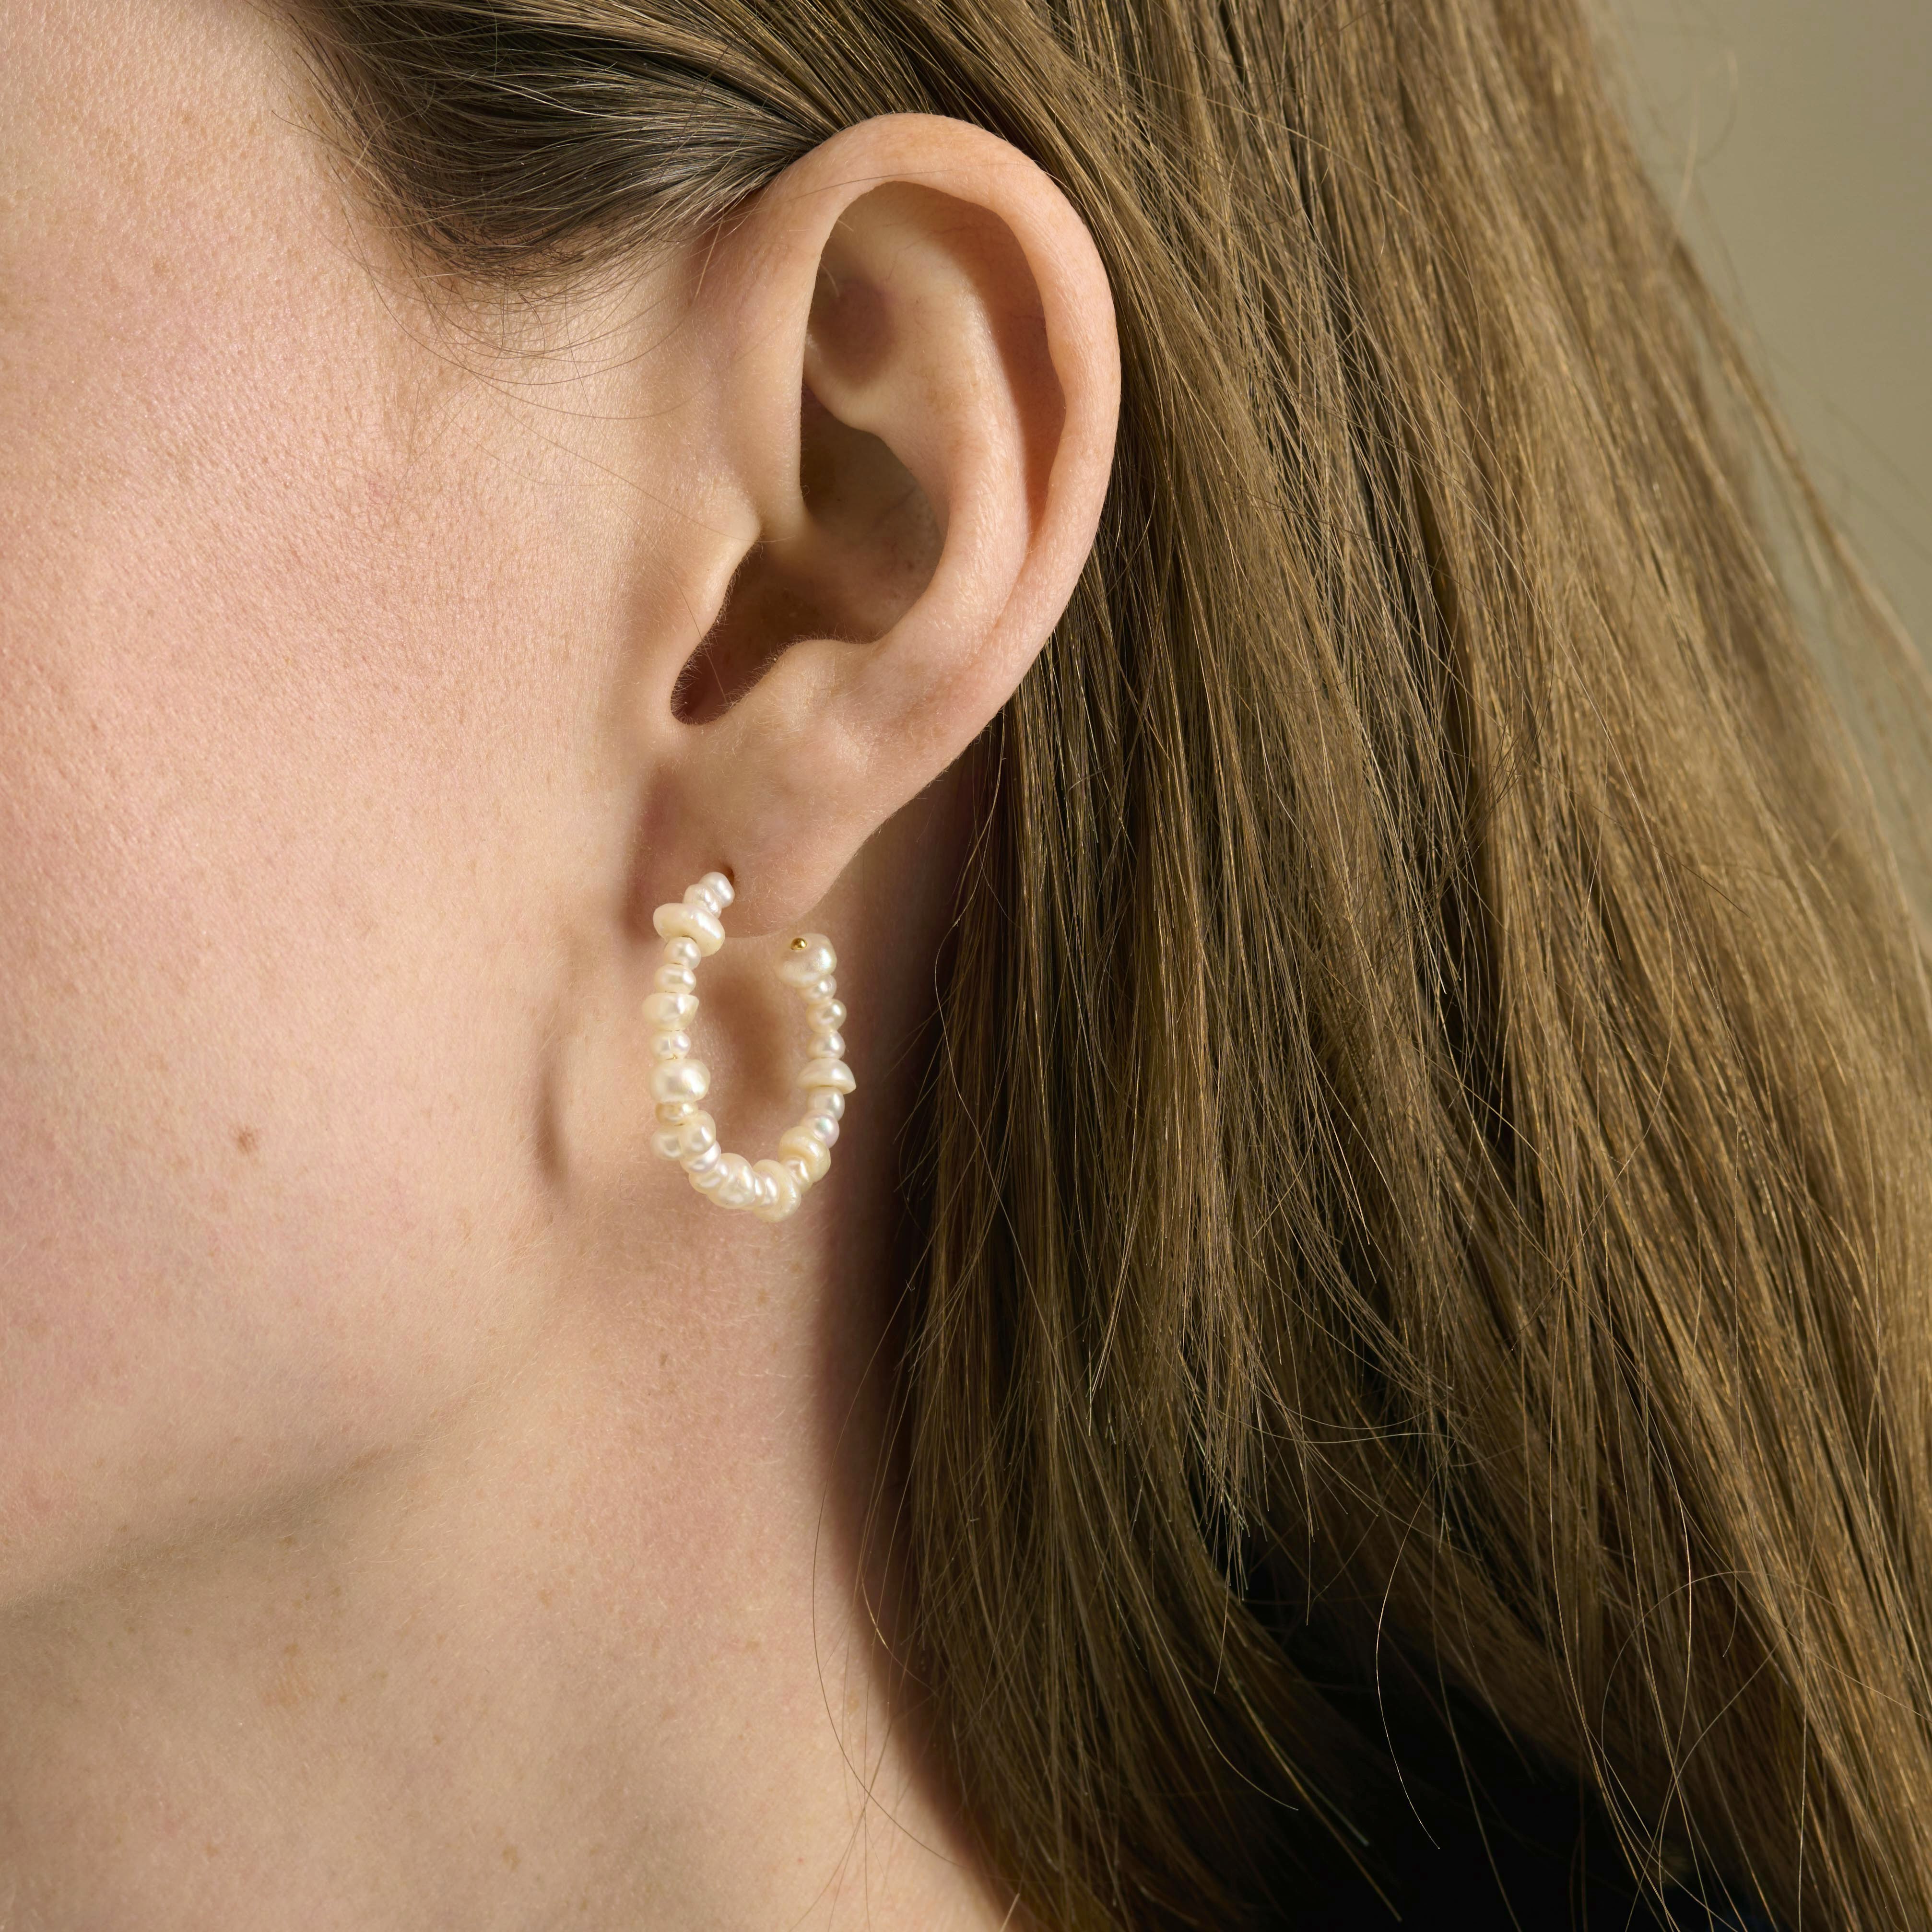 Liberty Hoops from Pernille Corydon in Goldplated Silver Sterling 925